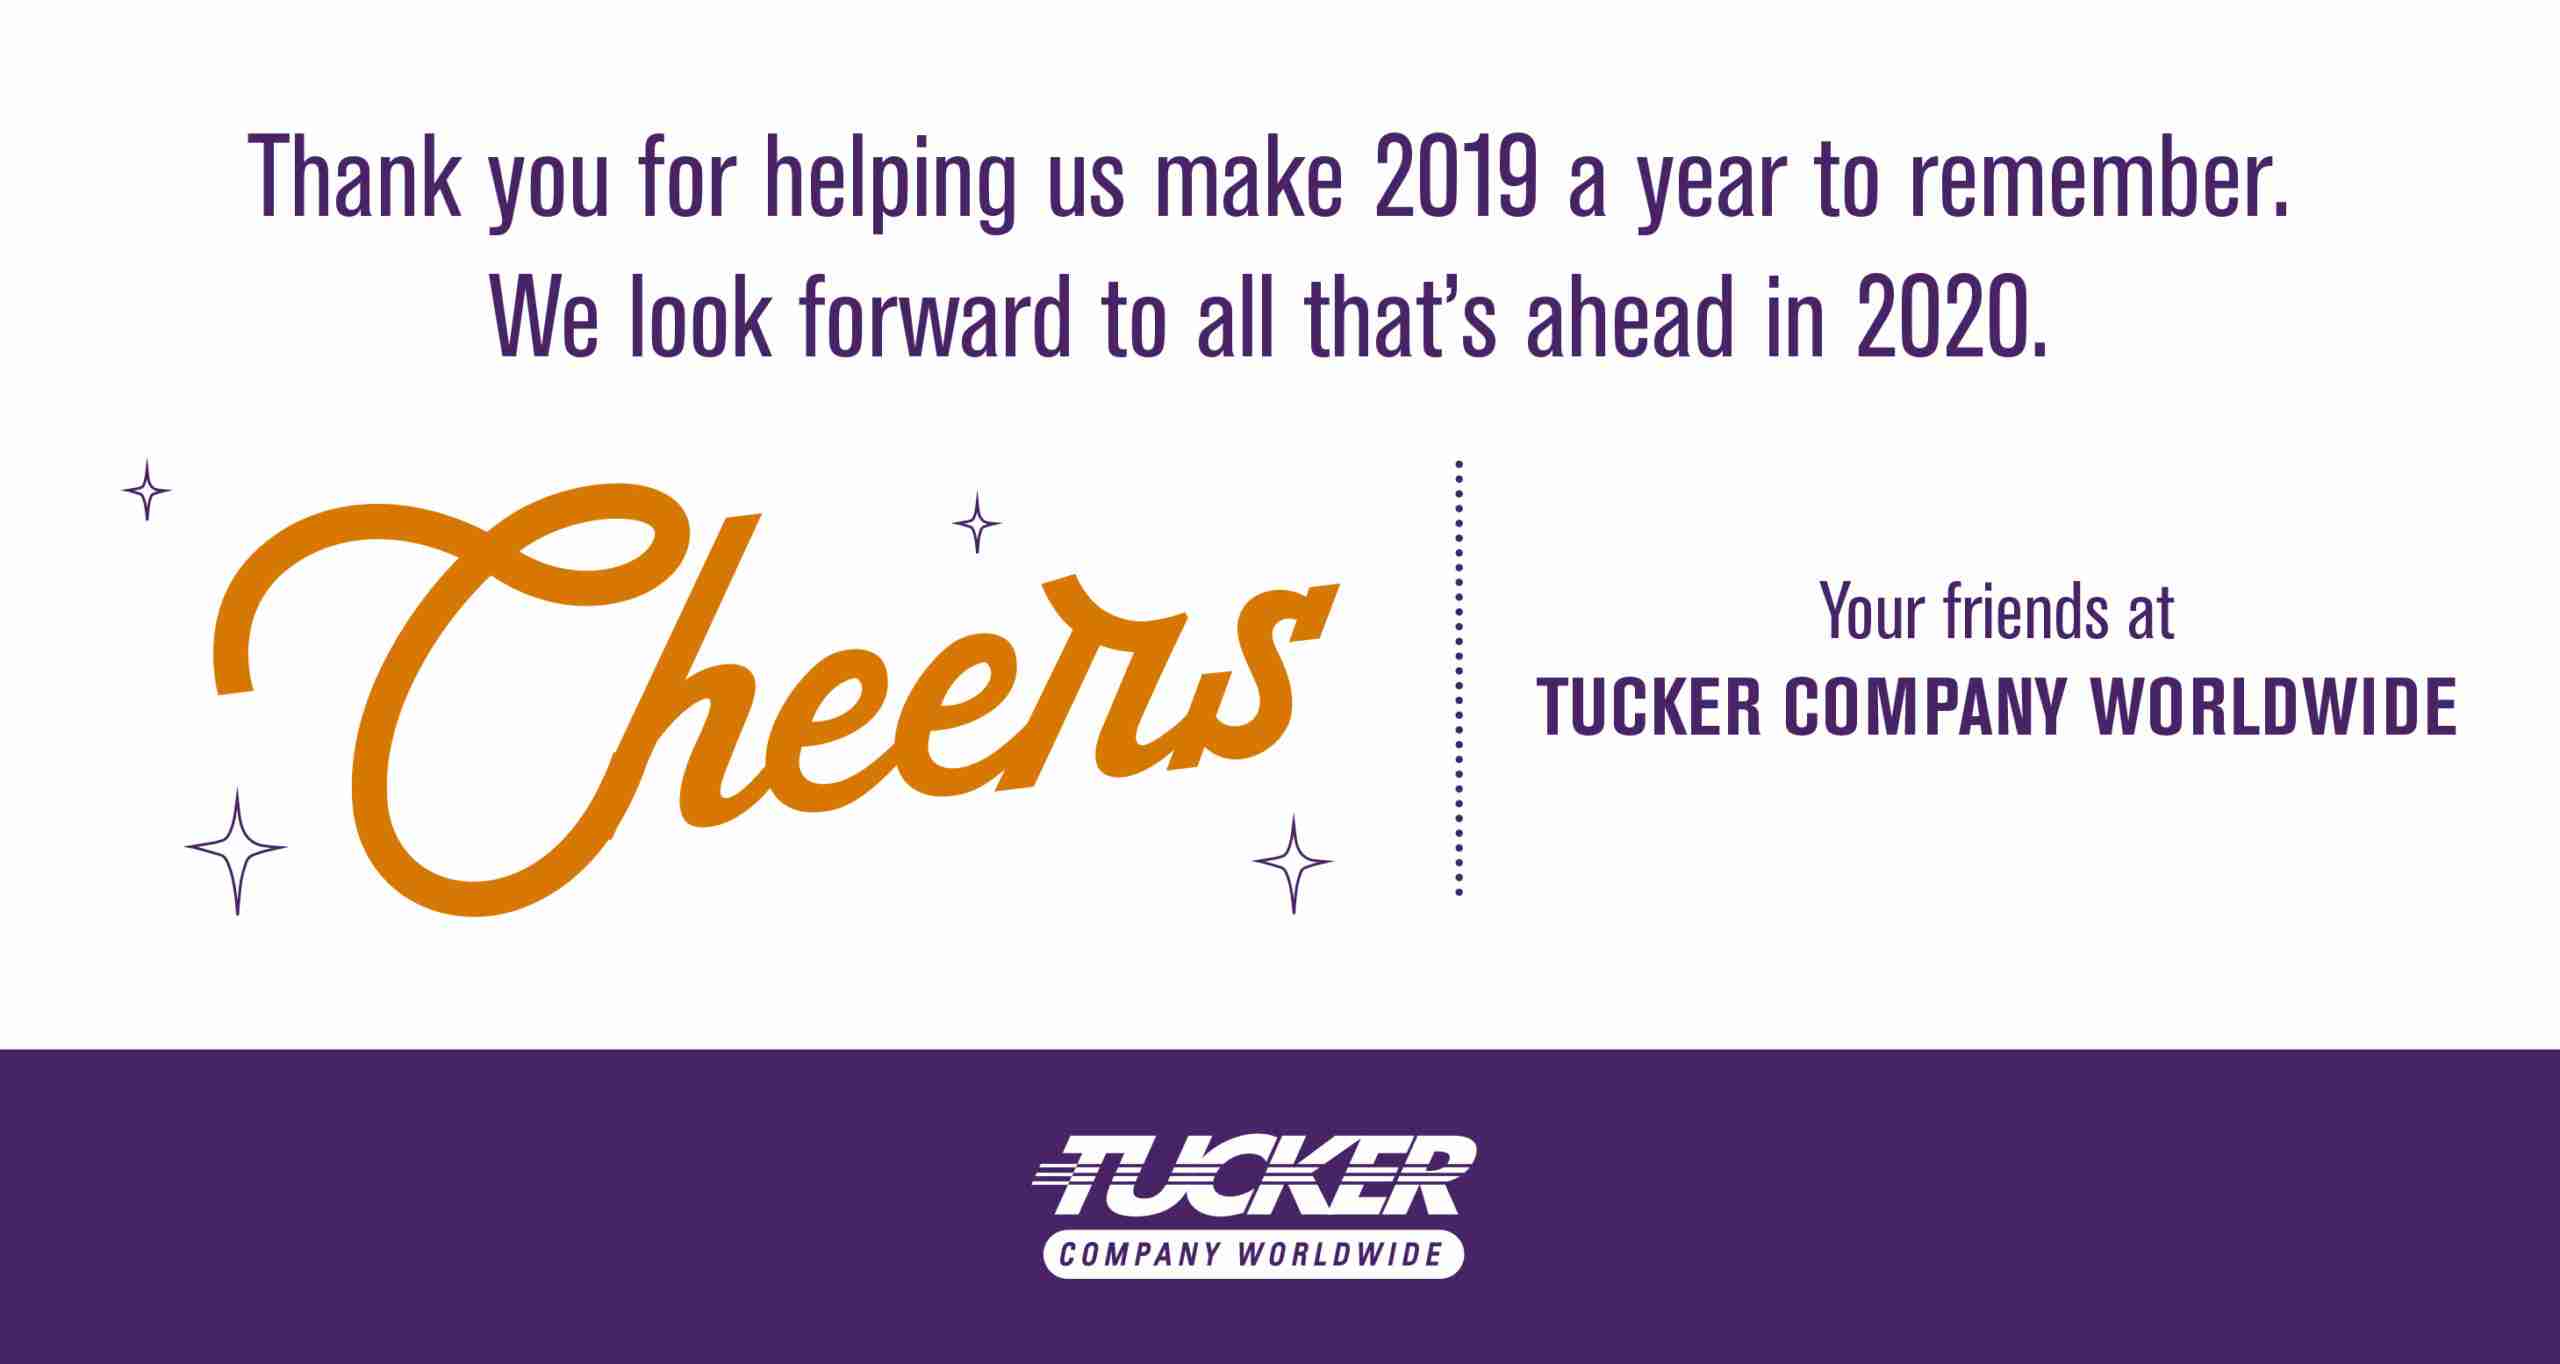 Thank you for helping us make 2019 a year to remember